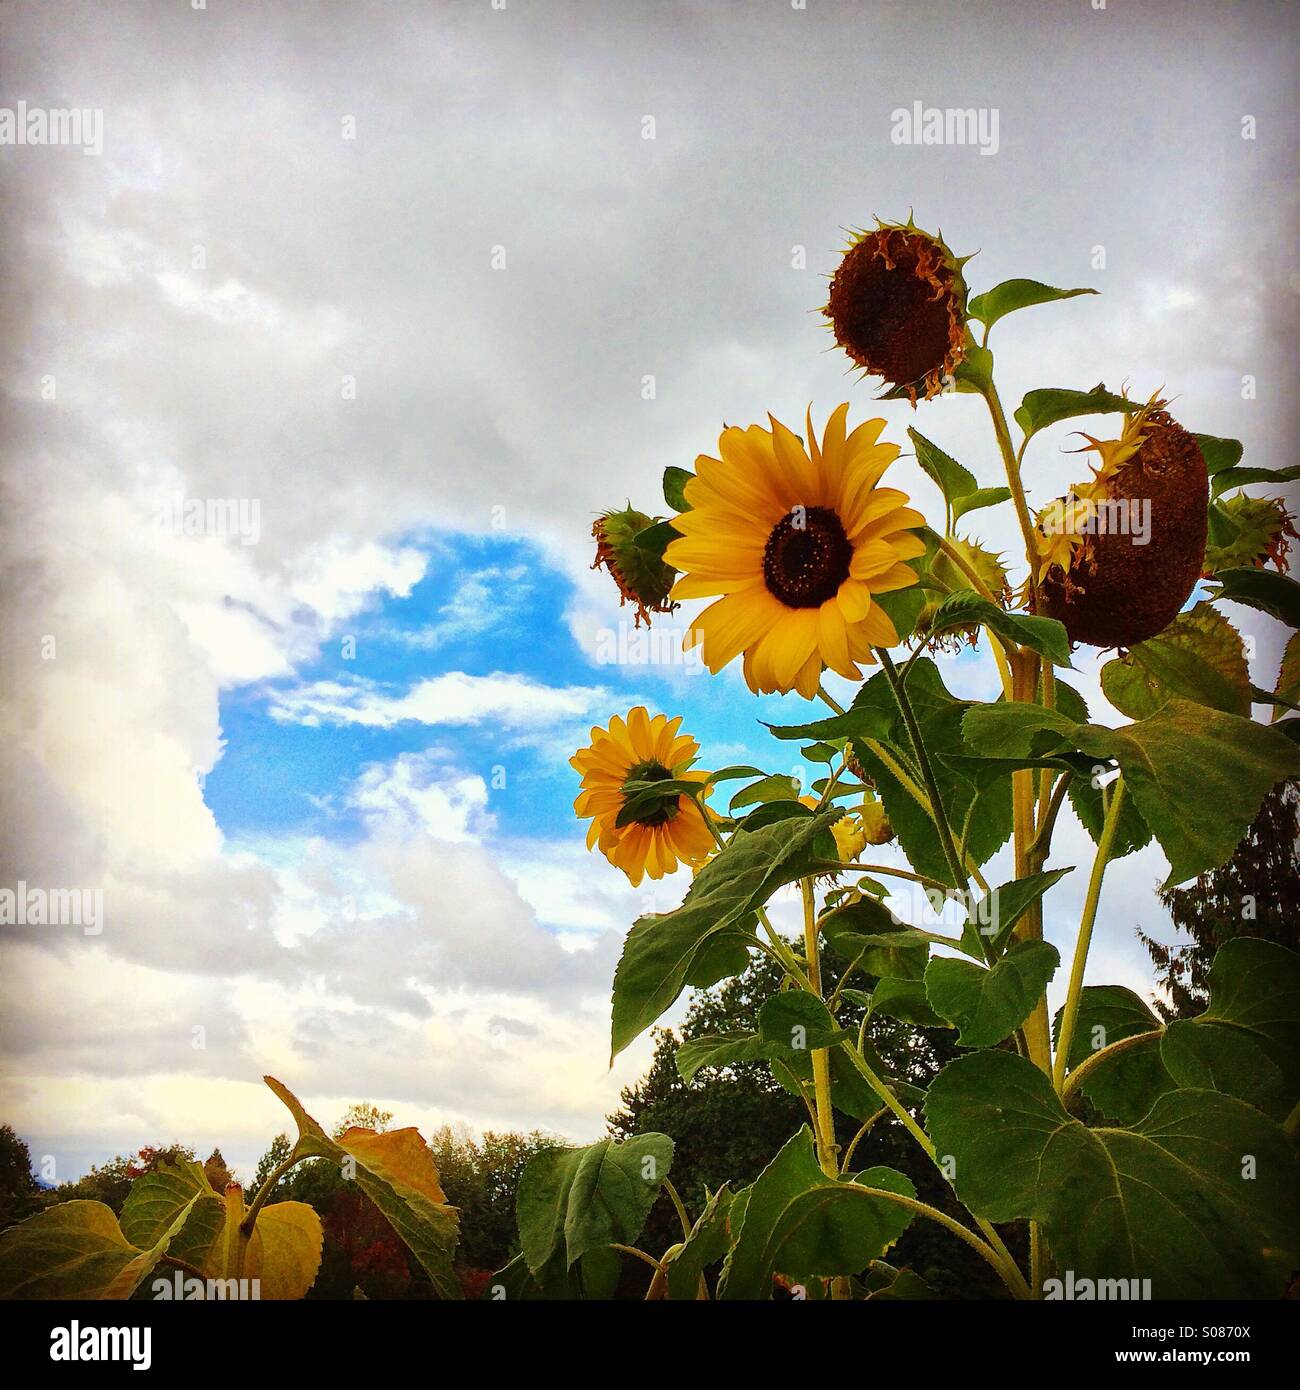 Sunflowers in front of a cloud sky with a patch of blue Stock Photo